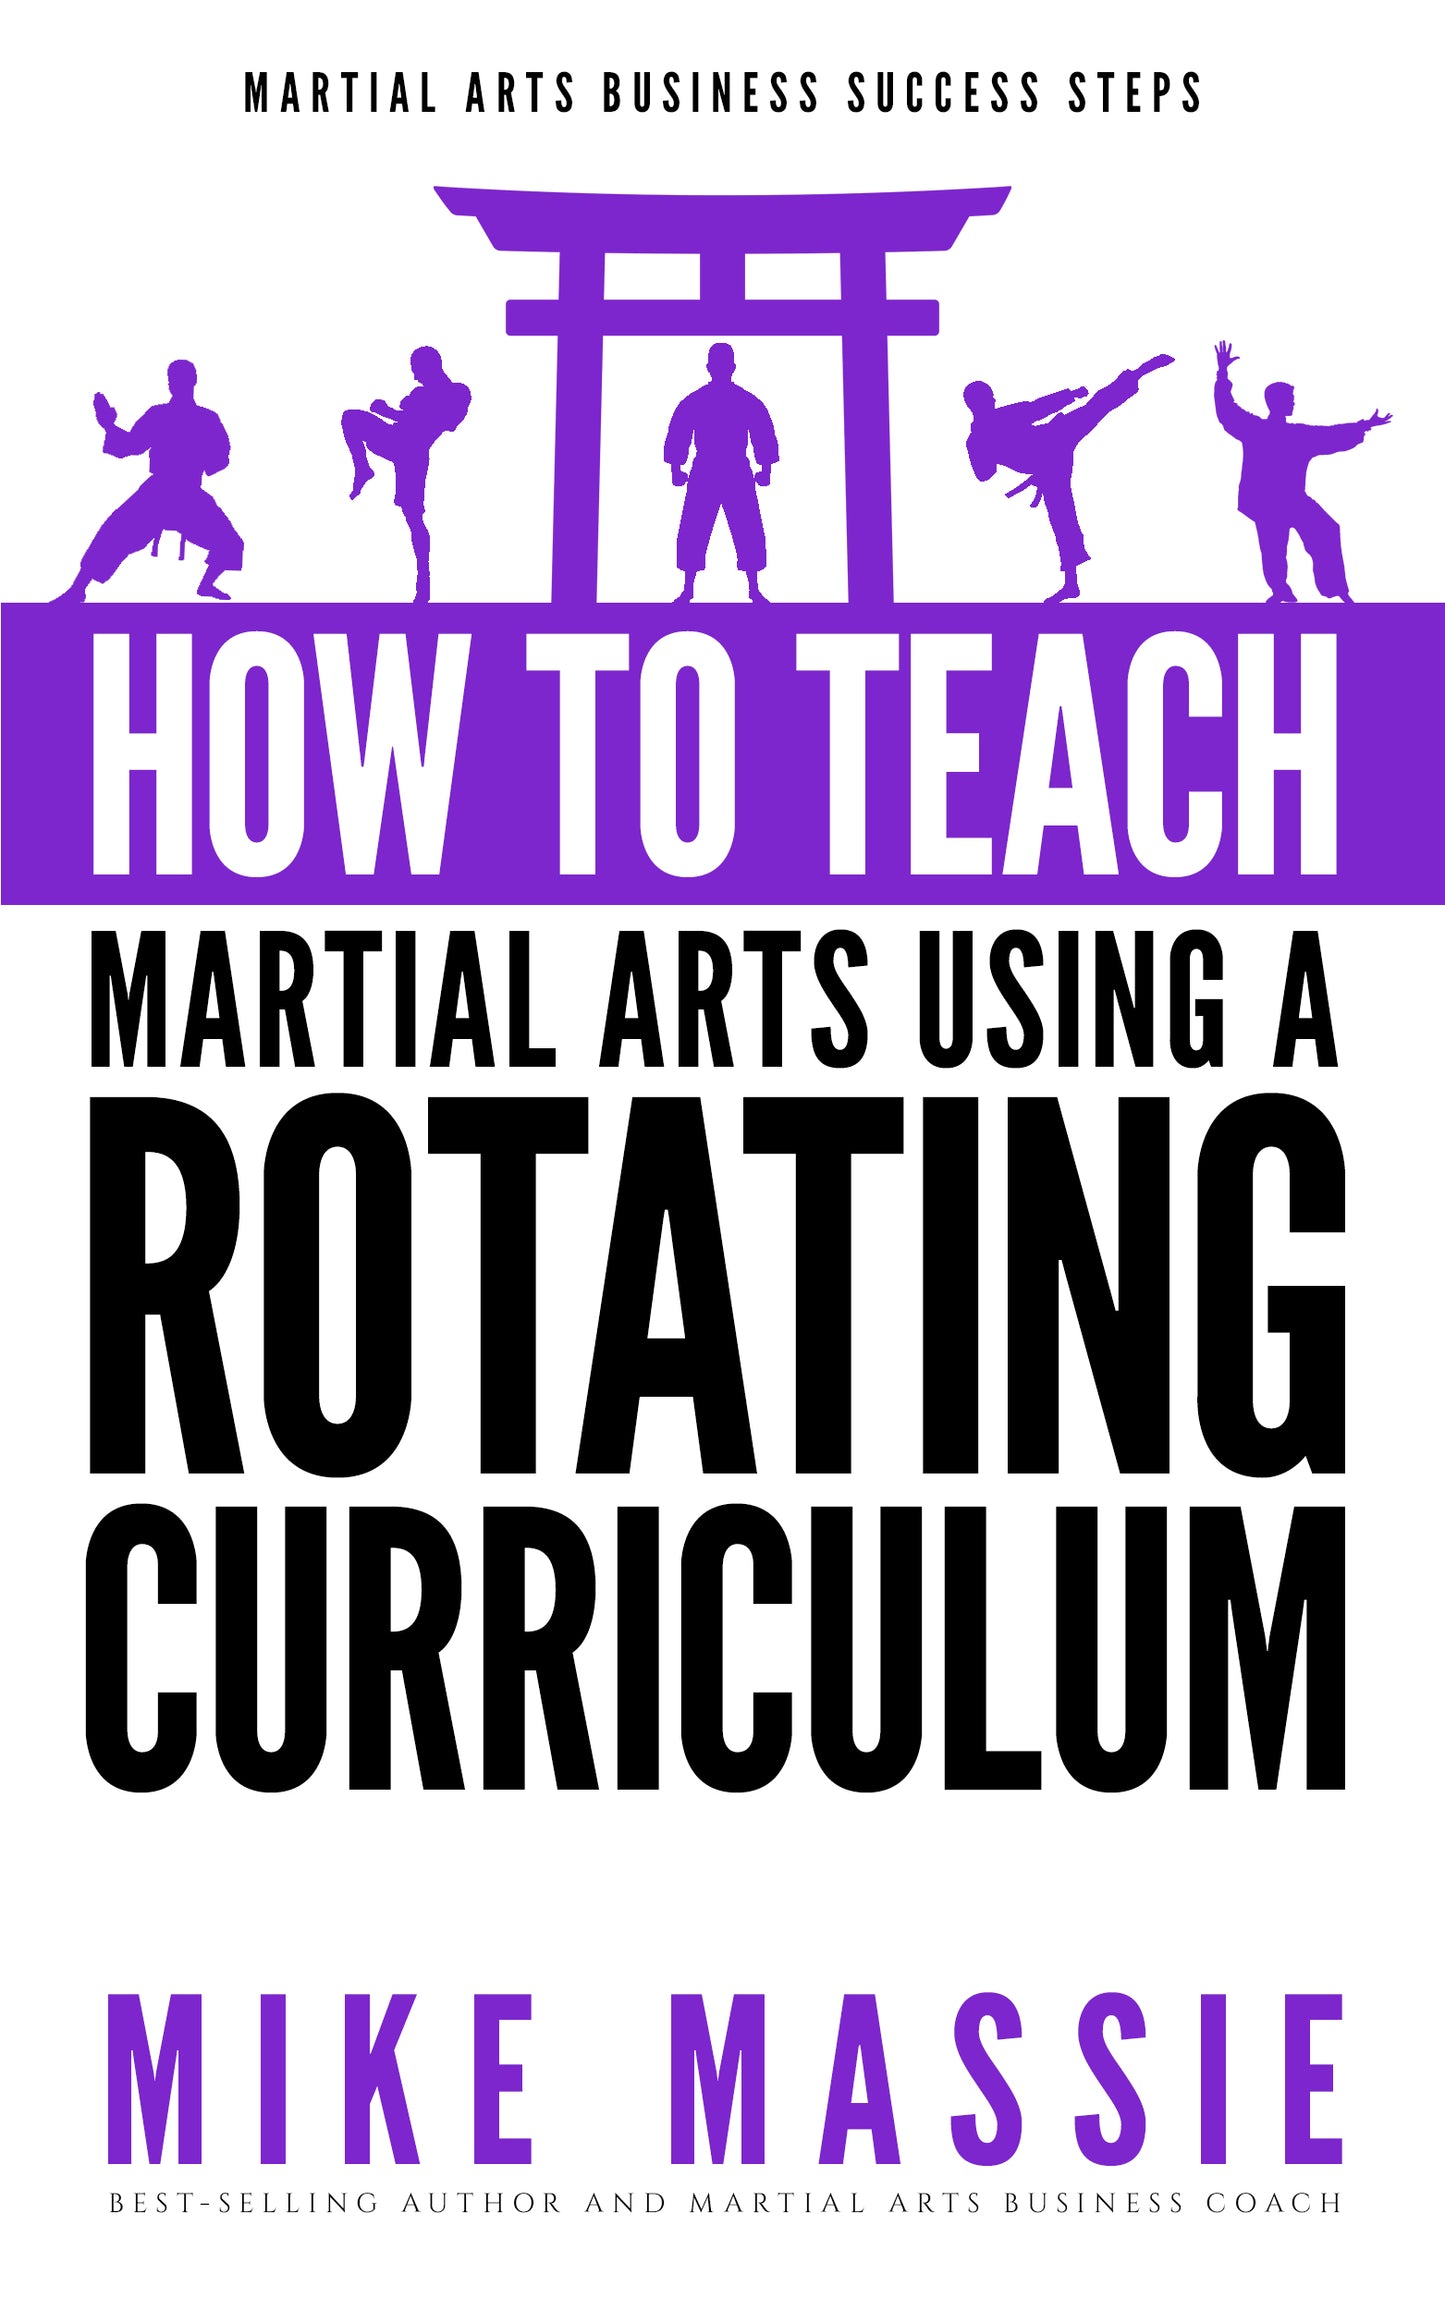 How To Teach Martial Arts Using A Rotating Curriculum (Kindle and ePub)